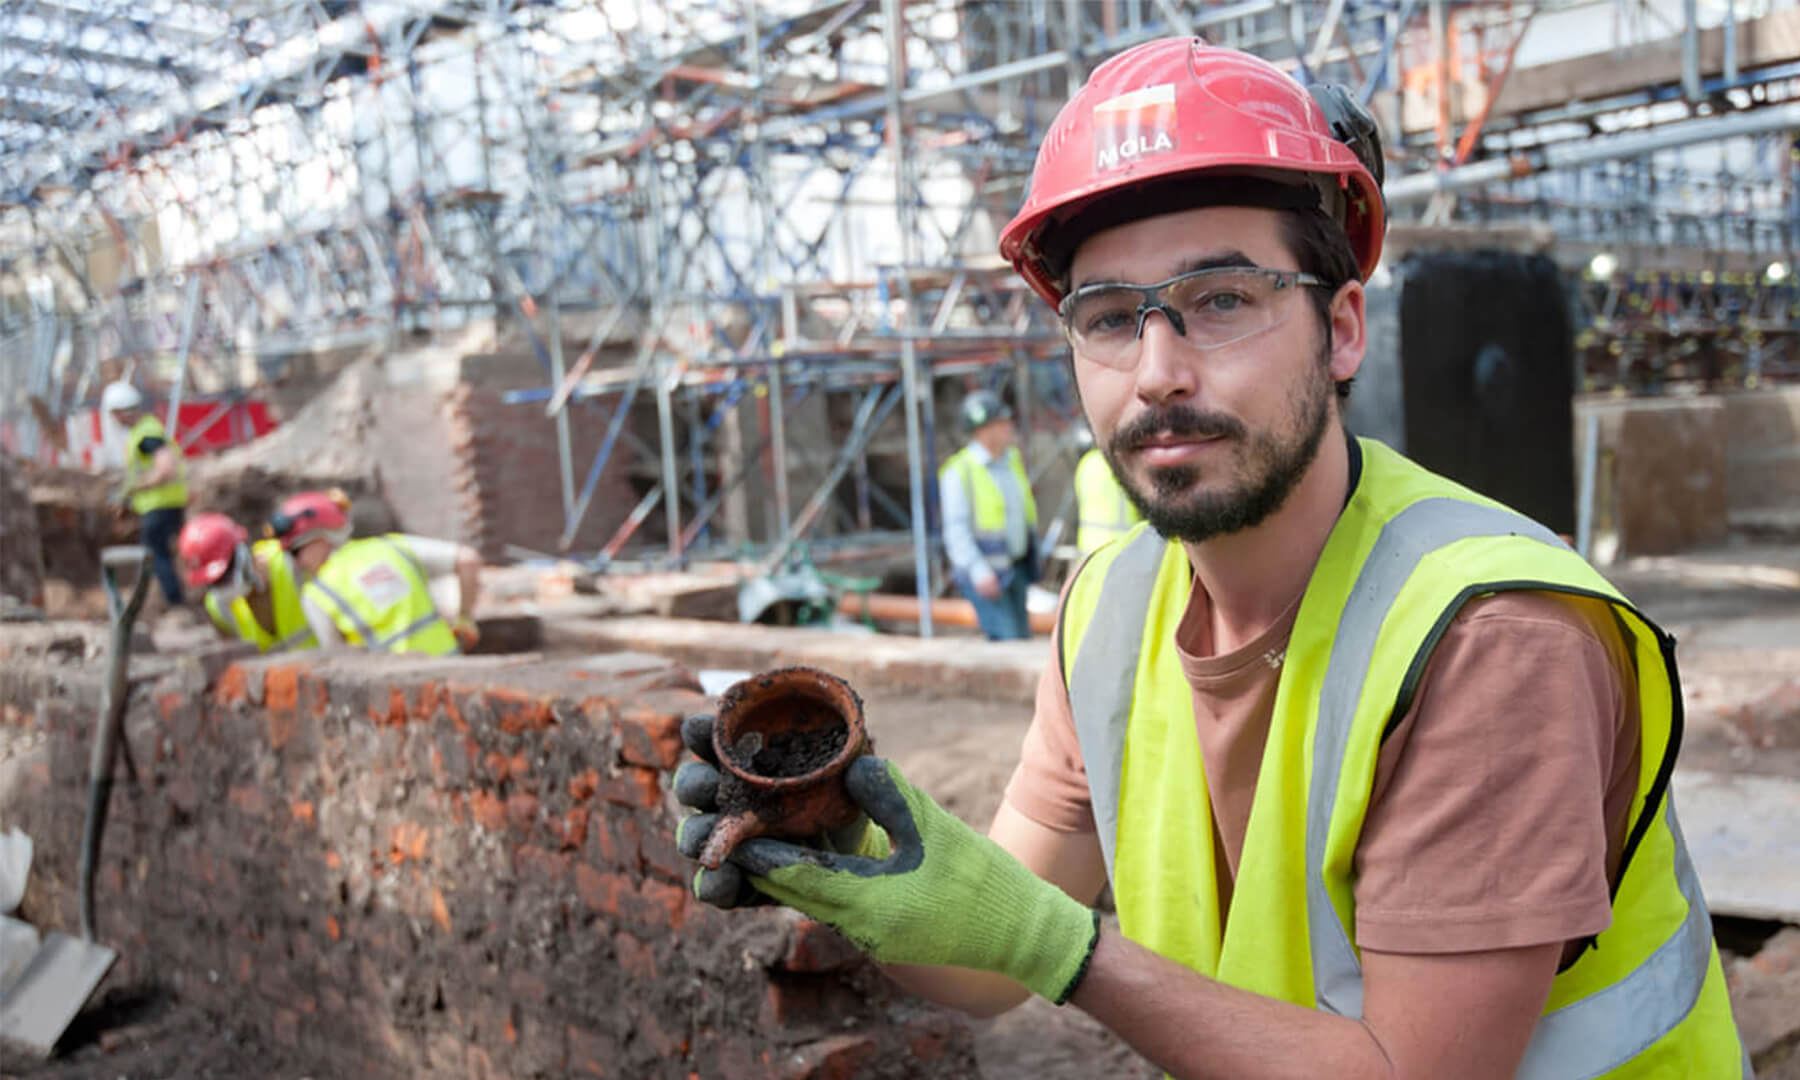 An archaeologist at the Curtain Theatre site, the original theatreland of London